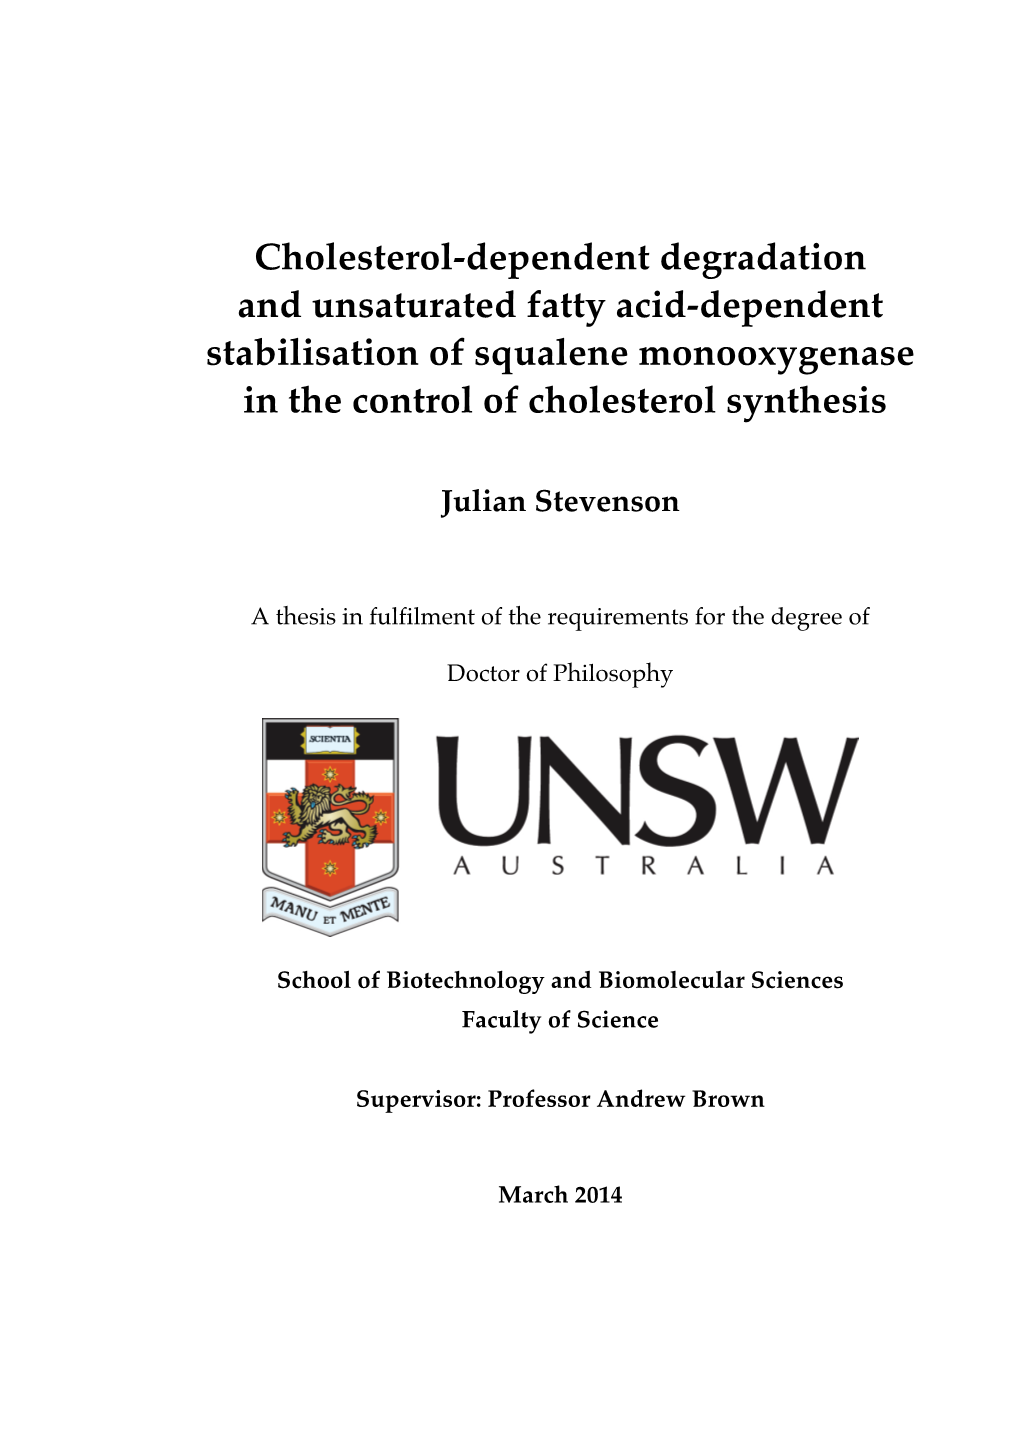 Cholesterol-Dependent Degradation and Unsaturated Fatty Acid-Dependent Stabilisation of Squalene Monooxygenase in the Control of Cholesterol Synthesis